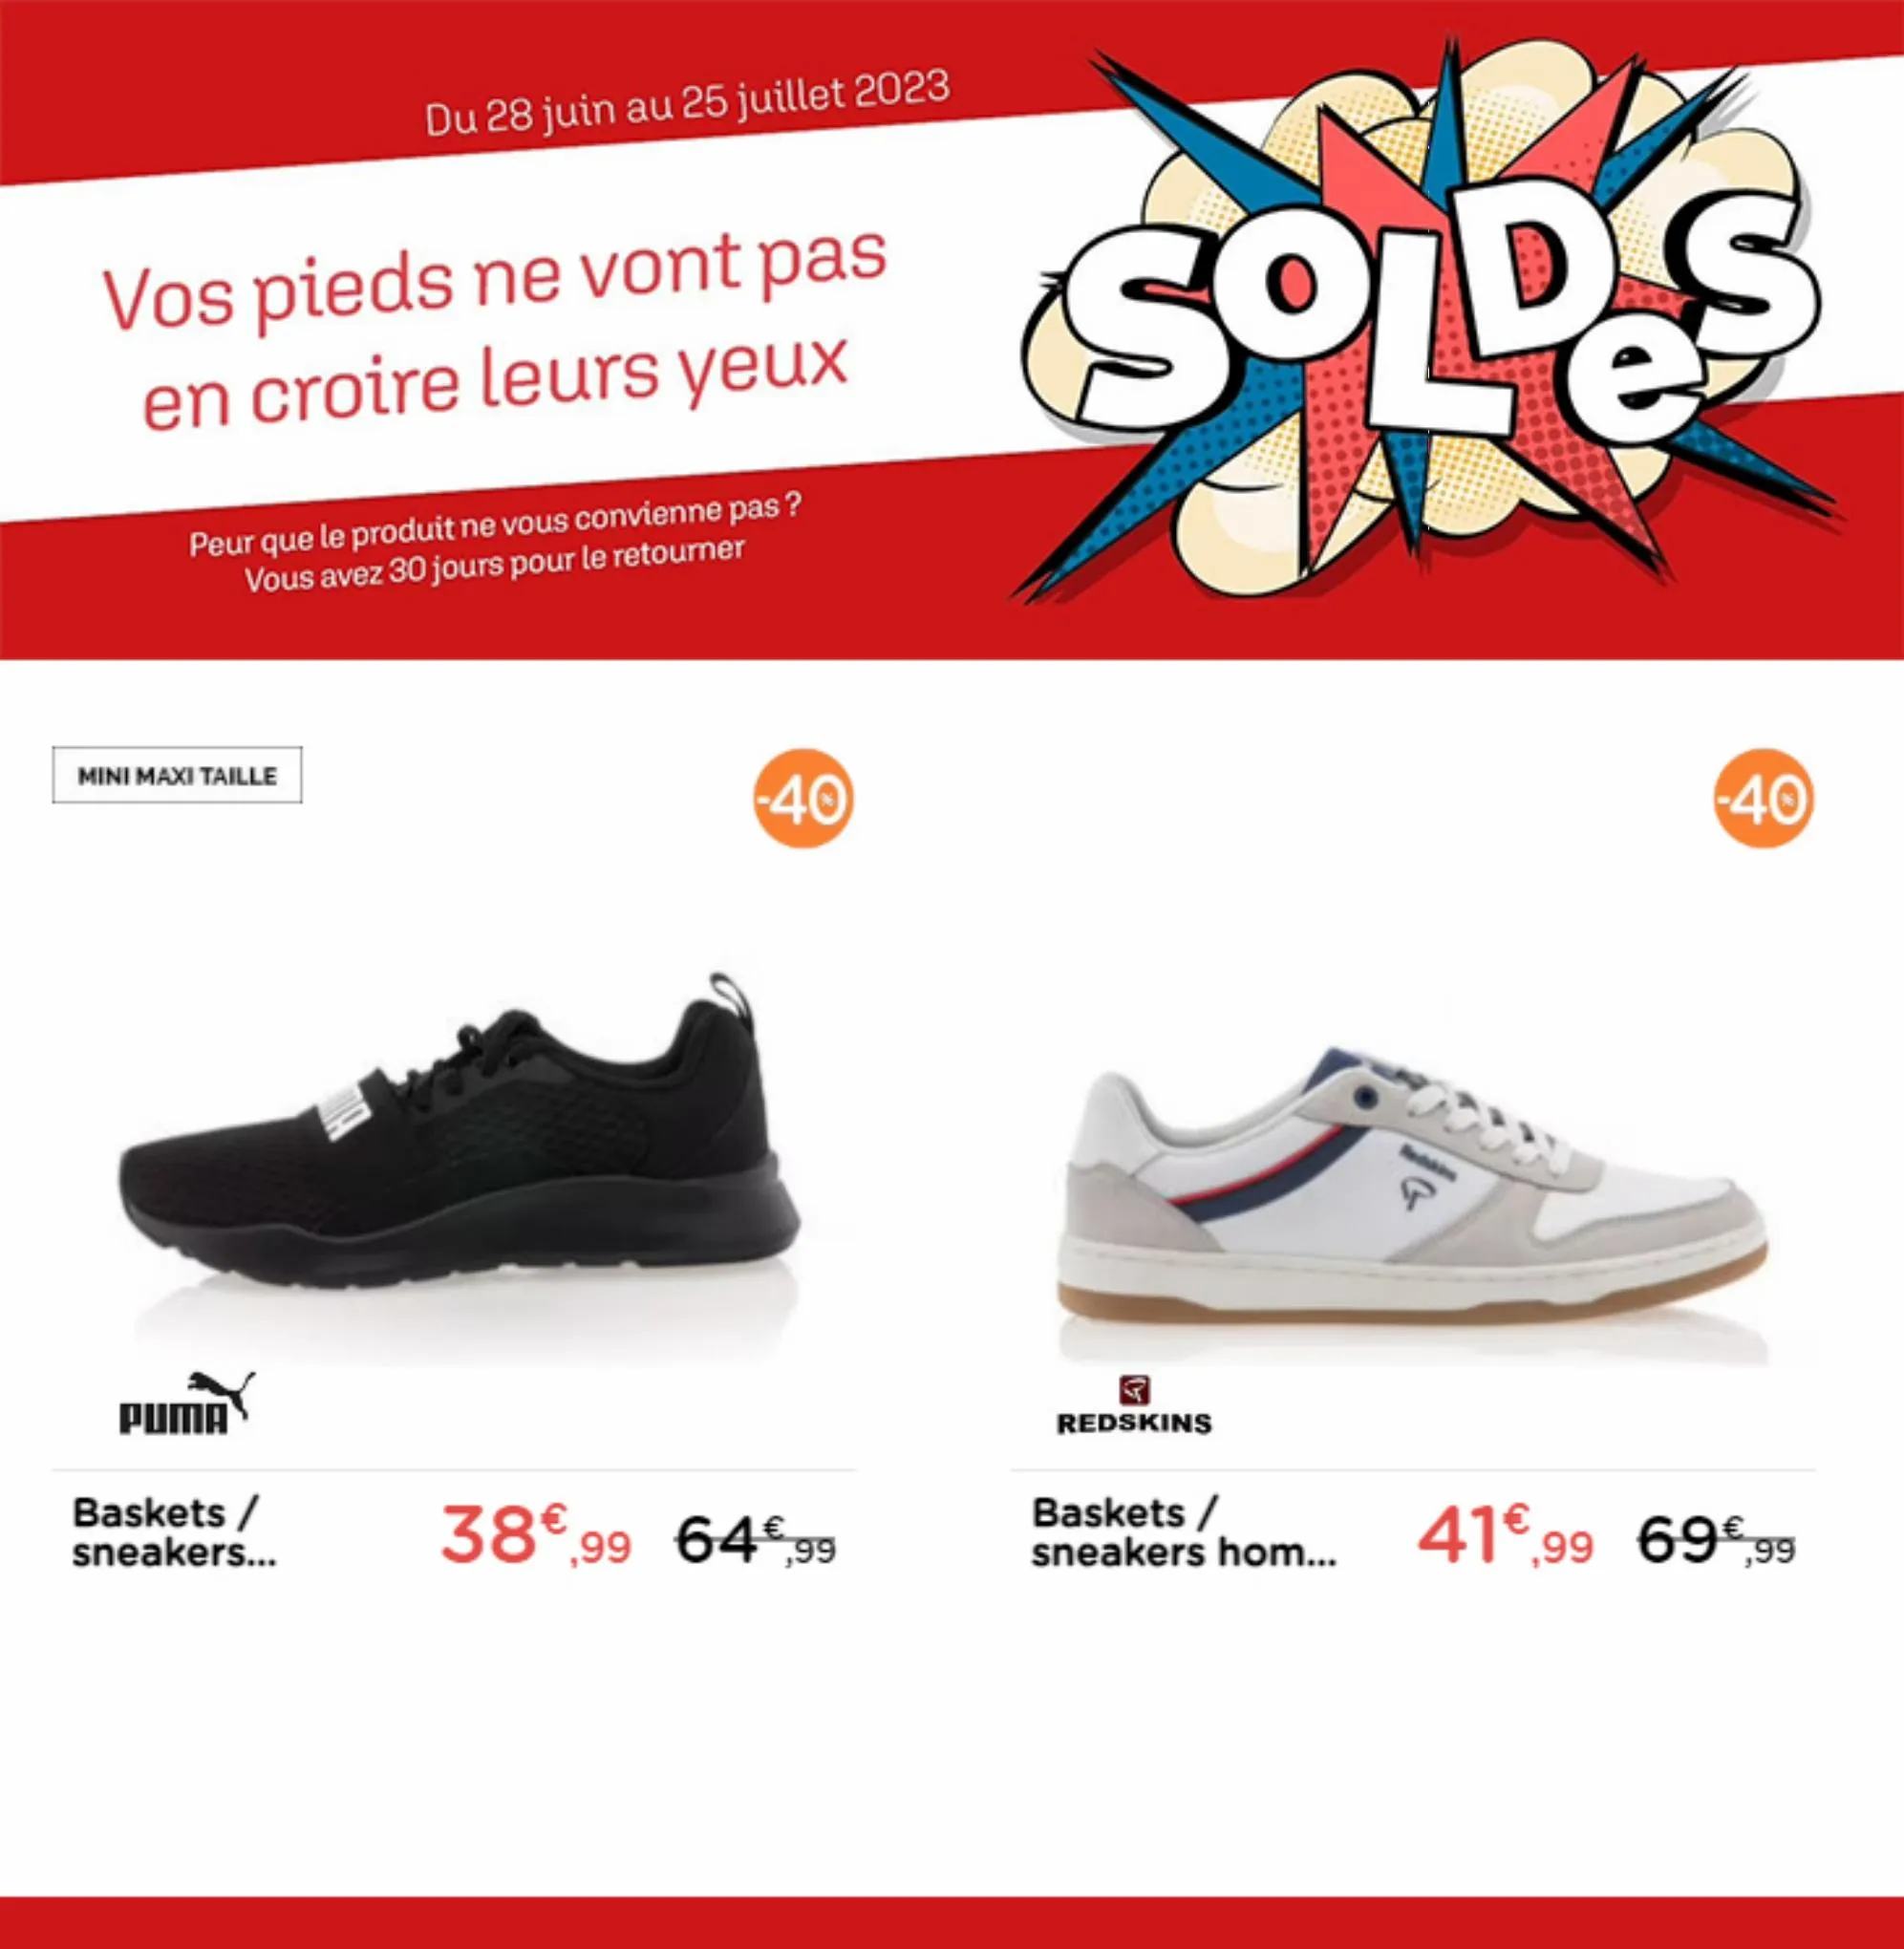 Catalogue Soldes Besson!, page 00005